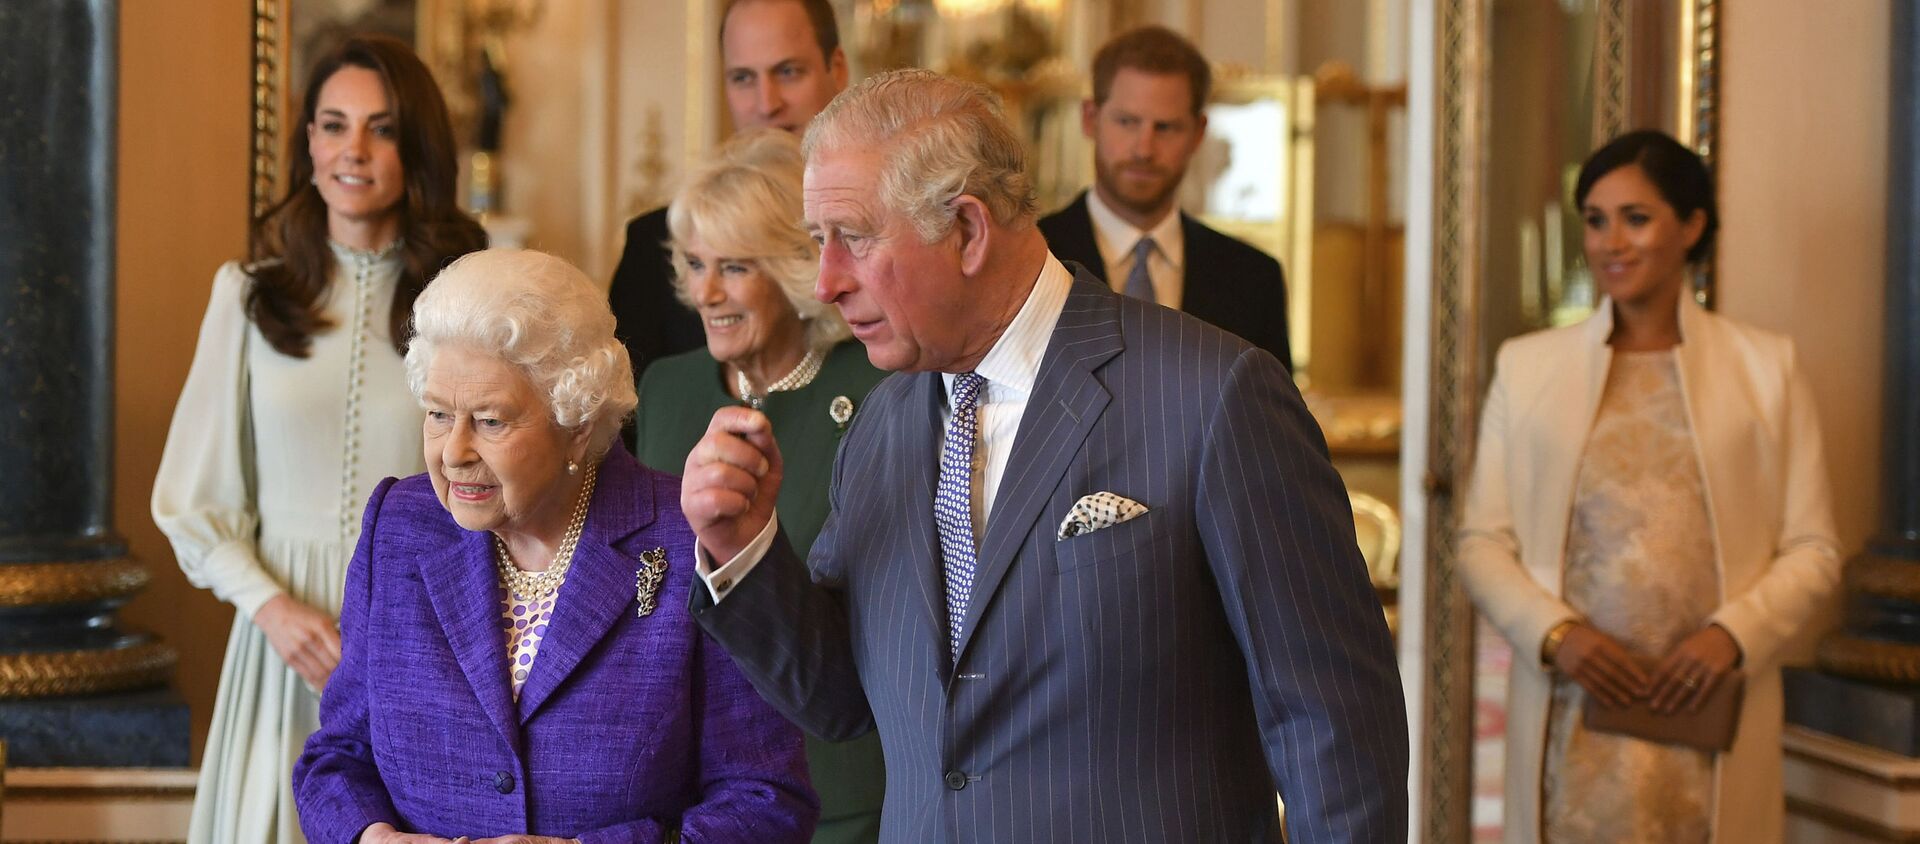 Queen Elizabeth II is joined by Prince Charles, the Prince of Wales, and behind from left, Kate, Duchess of Cambridge, Camilla, Duchess of Cornwall, Prince William, Prince Harry and Meghan, Duchess of Sussex during a reception at Buckingham Palace, London, Tuesday 5 March 2019, to mark the 50th anniversary of the Prince of Wales' investiture. - Sputnik International, 1920, 09.03.2021